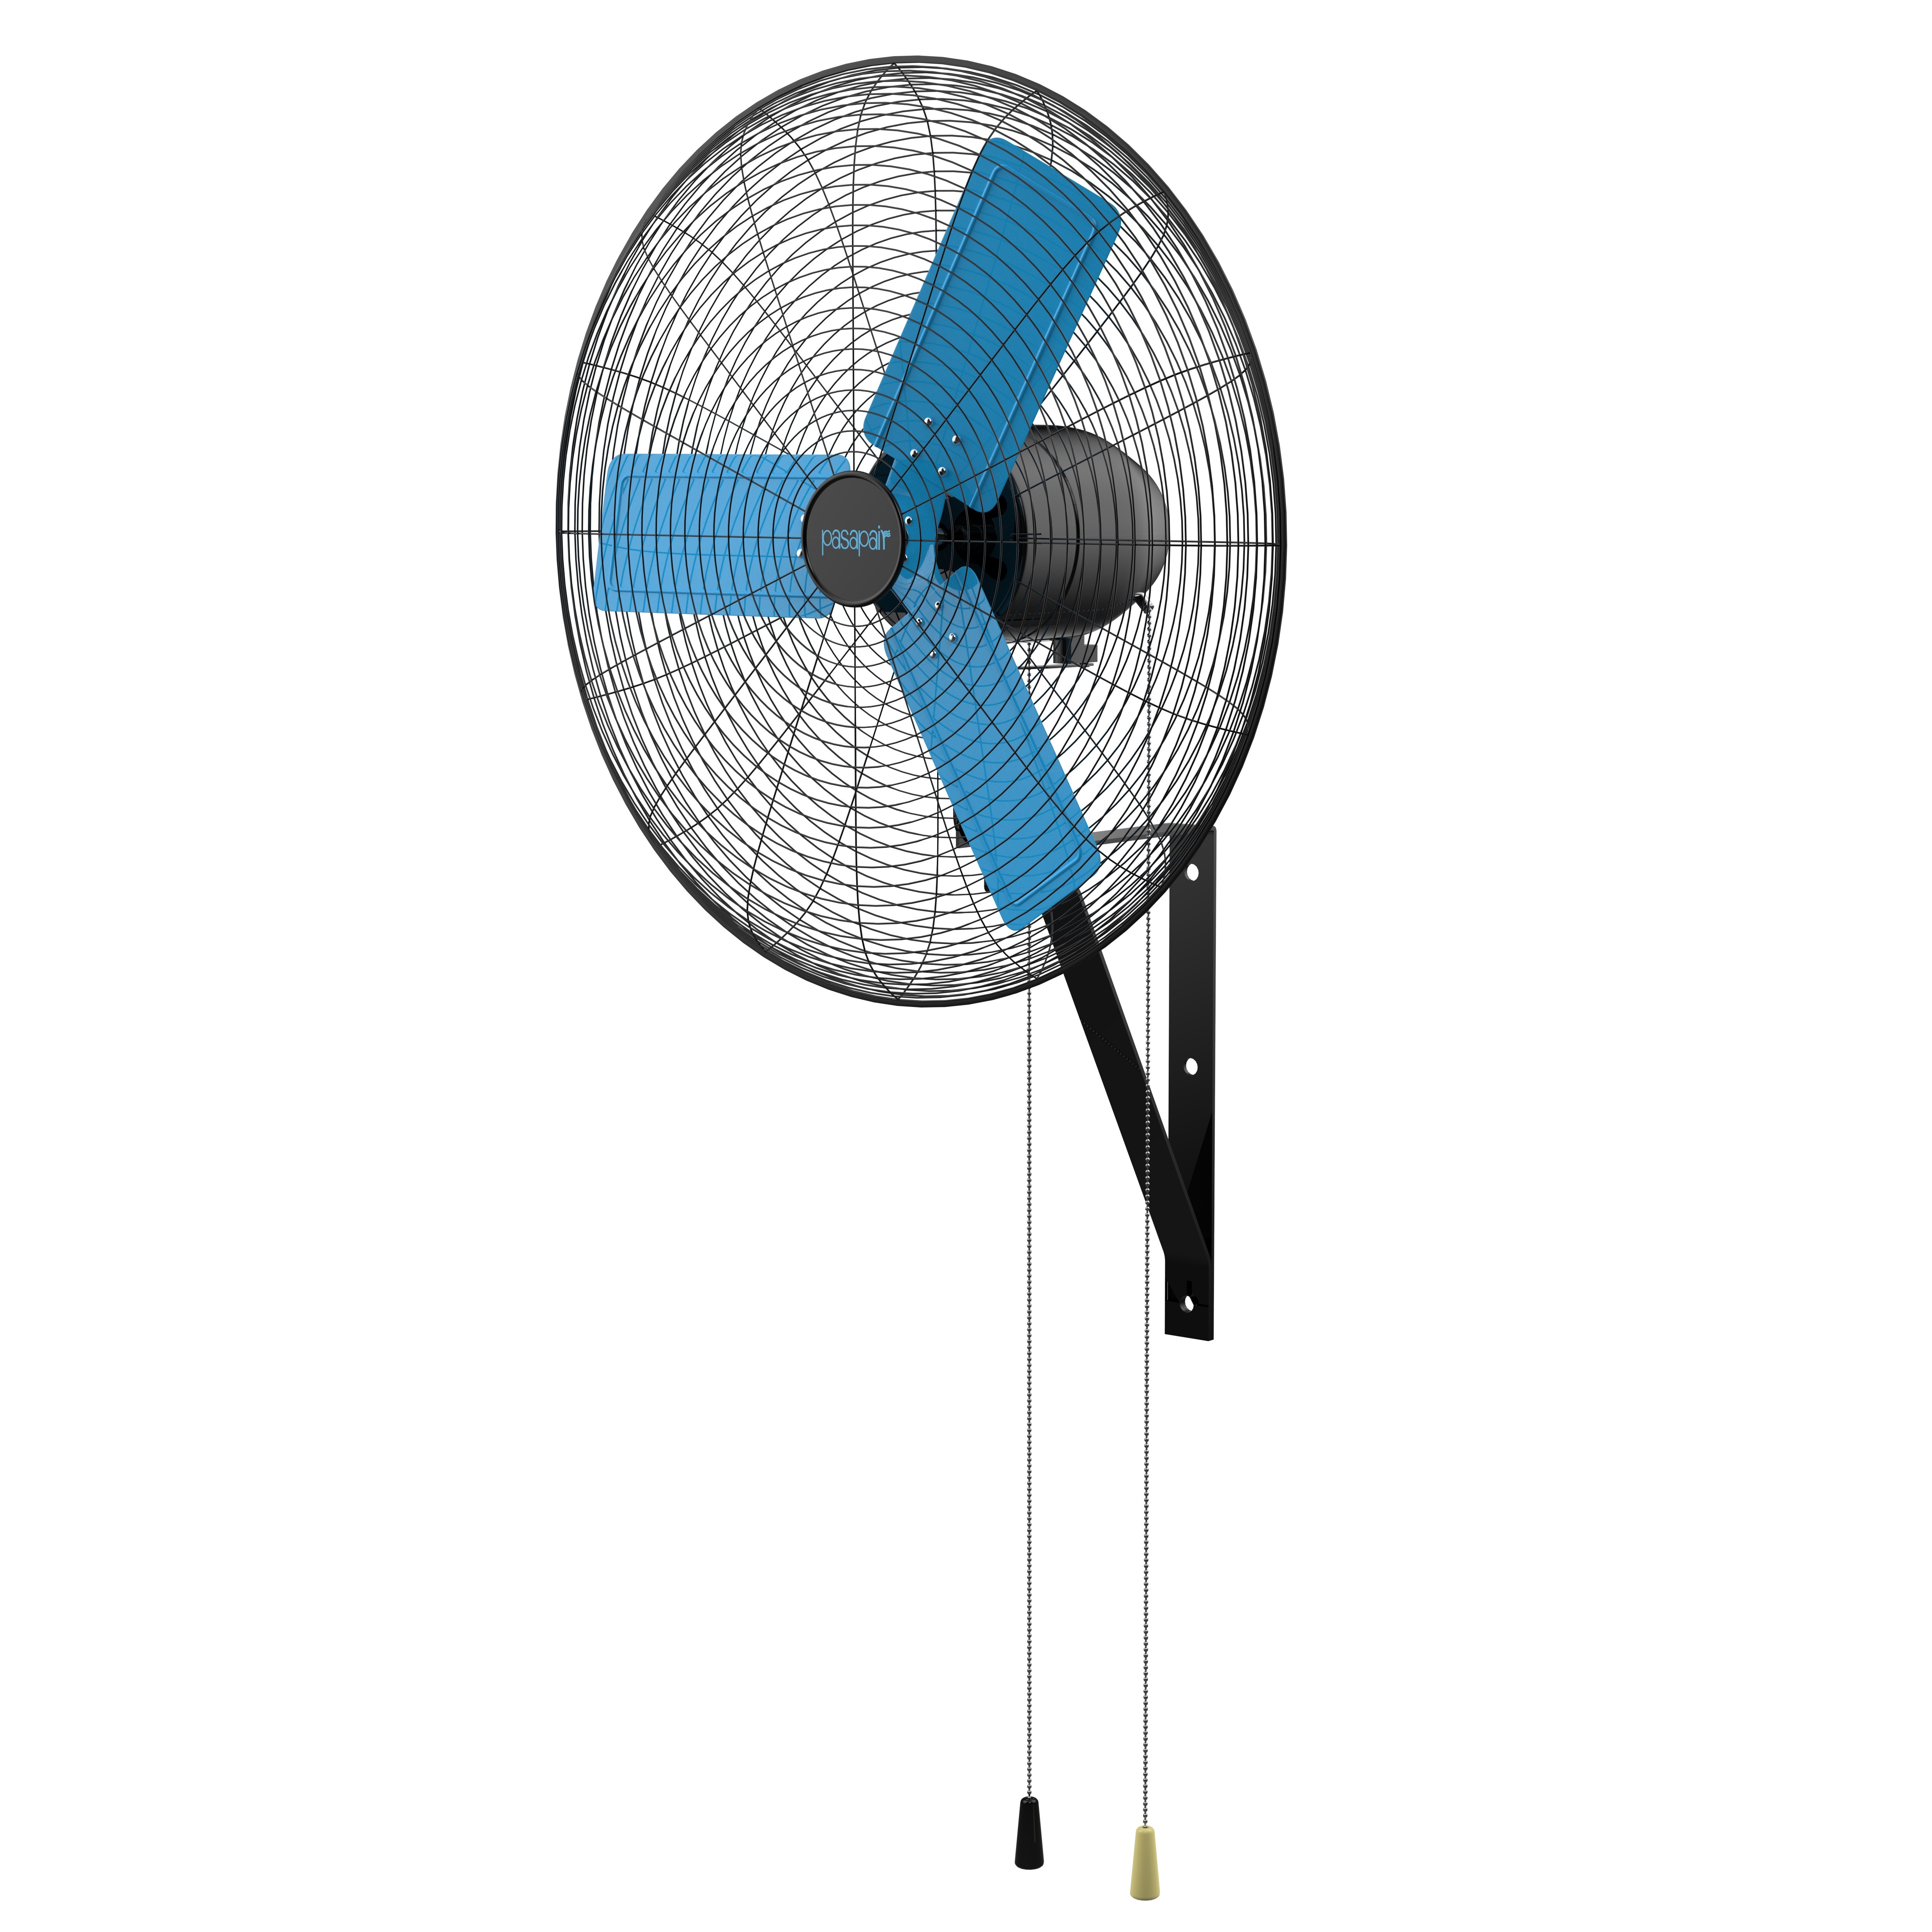 

24 Inch Industrial Oscilating Wall Fan-5380 Cfm Large Fan With Safety Pulg-wall Mount 90° Oscillation For Garage And Patios-3-speeds, Etl Approved, 2.5m Power Cord